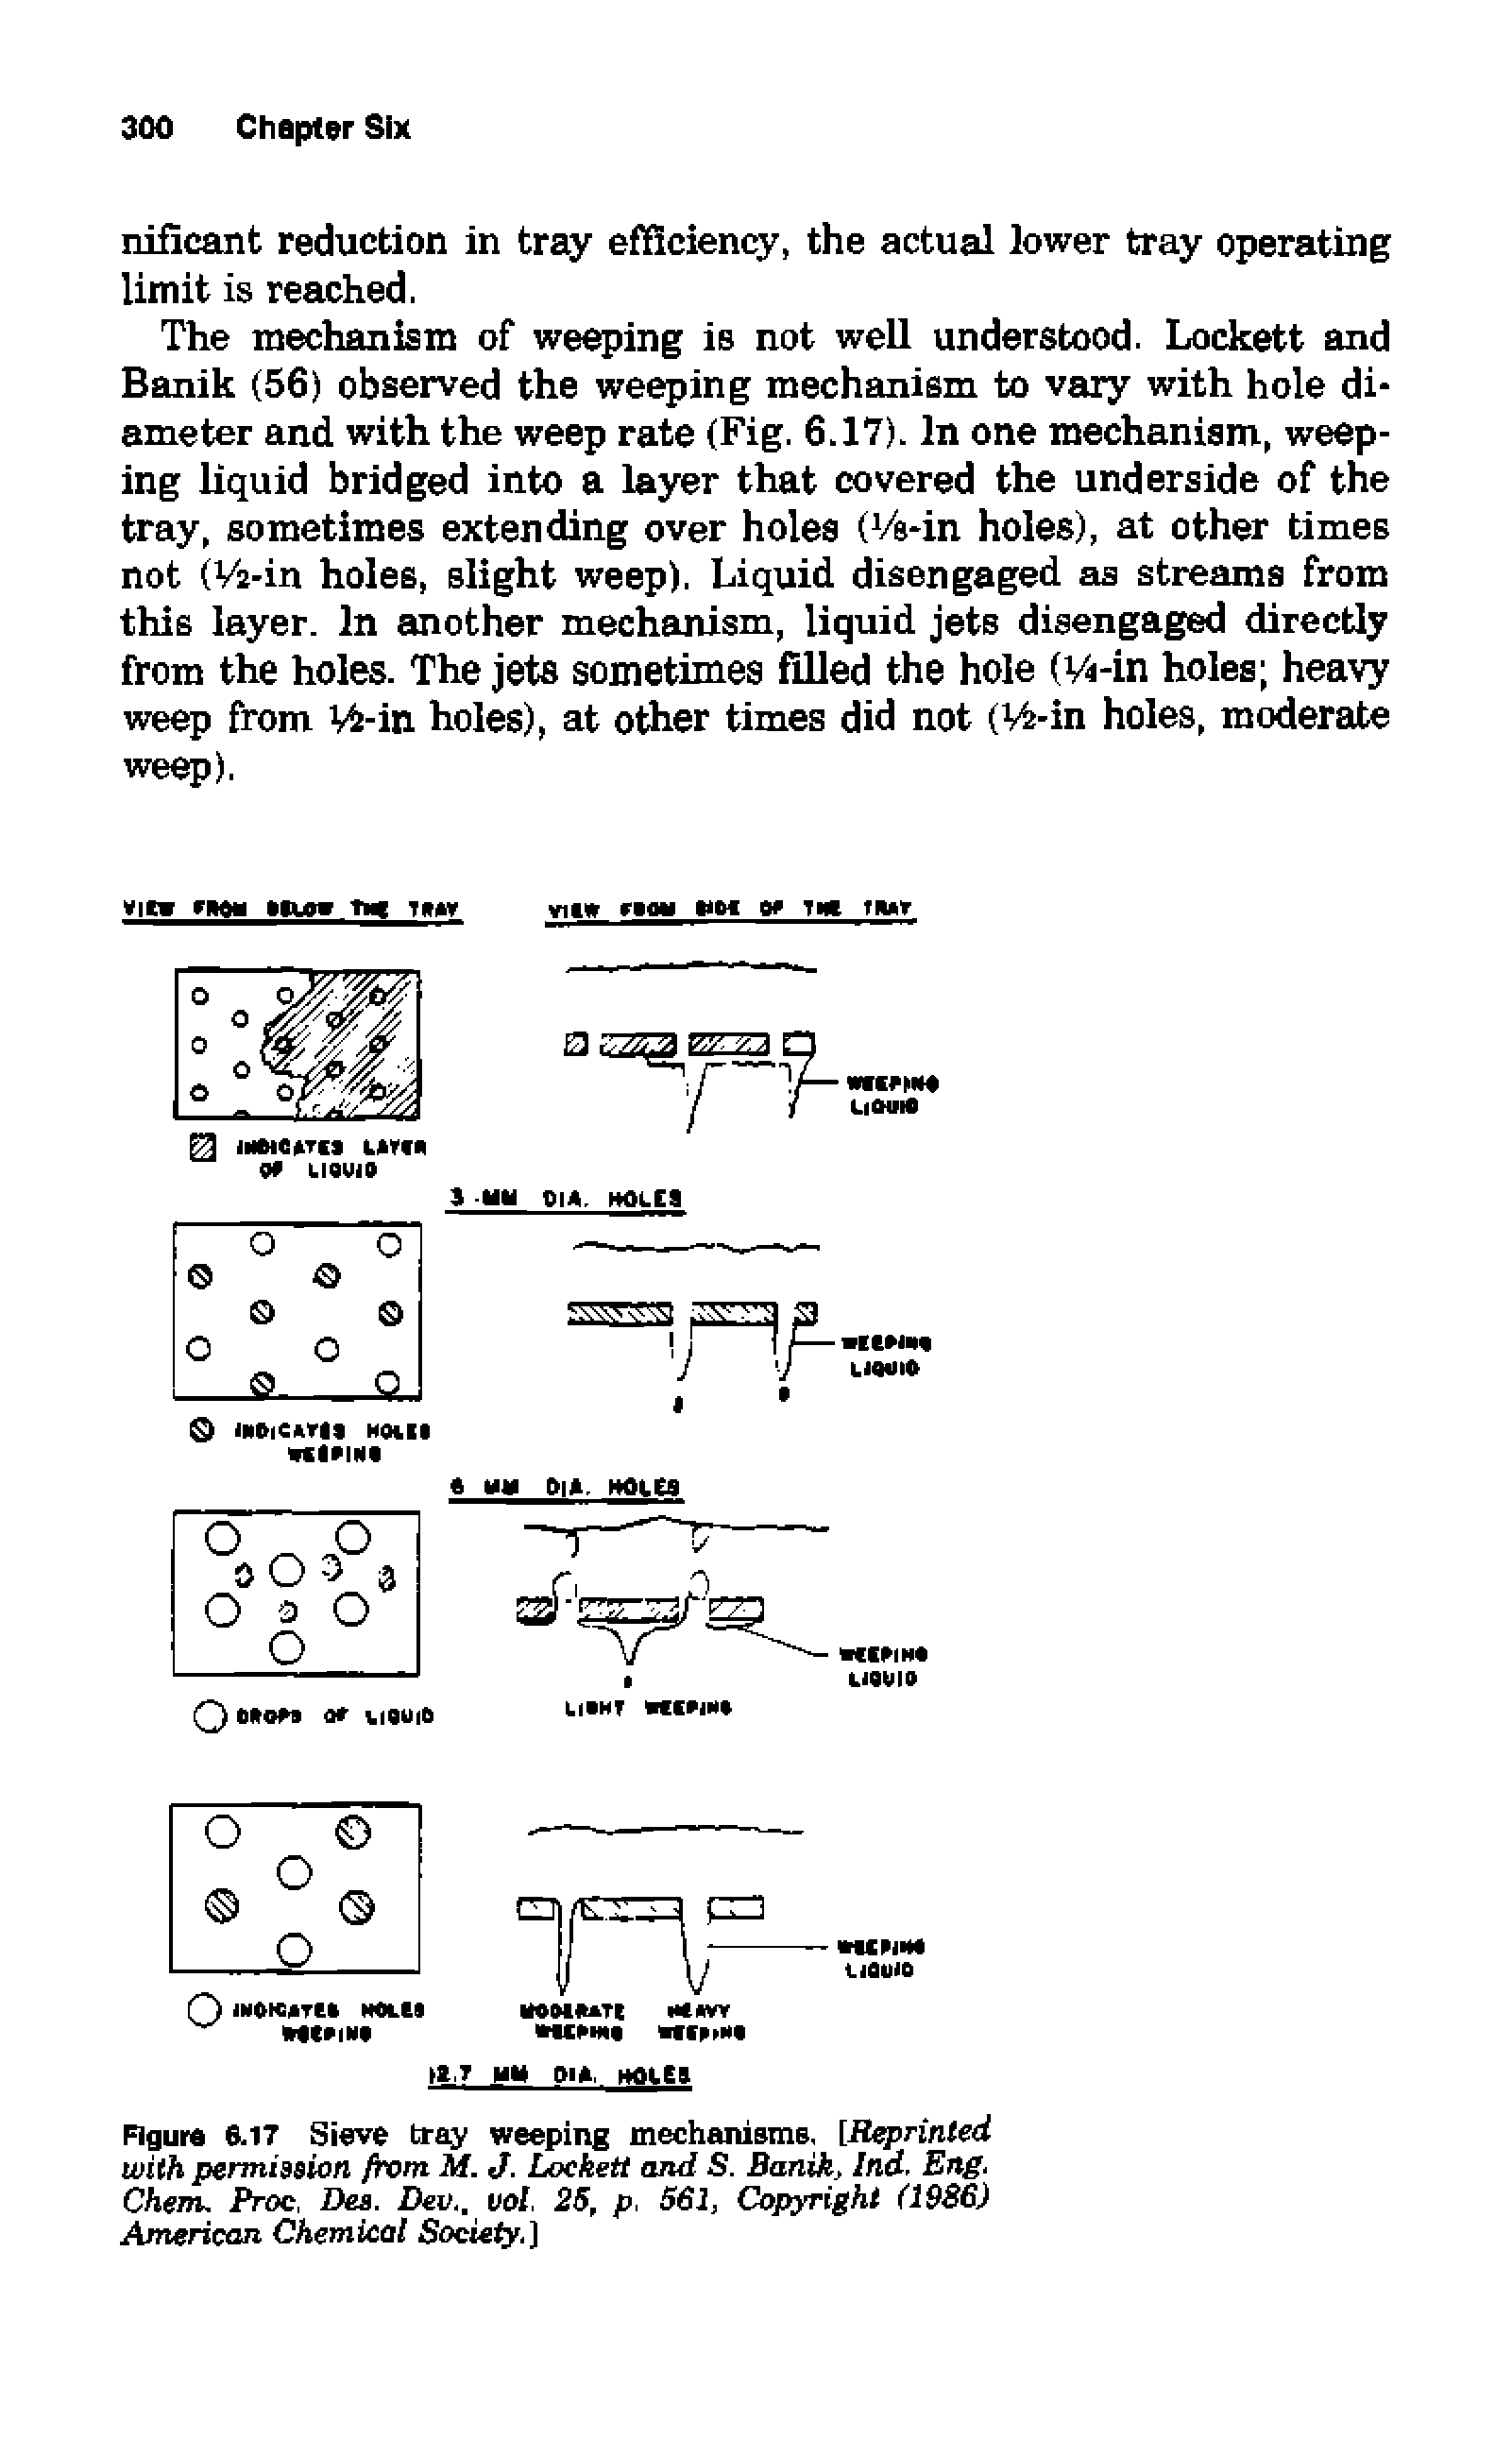 Figure 6.17 Sieve tray weeping mechanisms, [Reprinted with permission from M. J. Lockett and S. Banik, Ind. Eng. Chem. JVoc, Dea. Dev, vol, 25, p. 561, Copyright (1986) American Chemical Society.]...